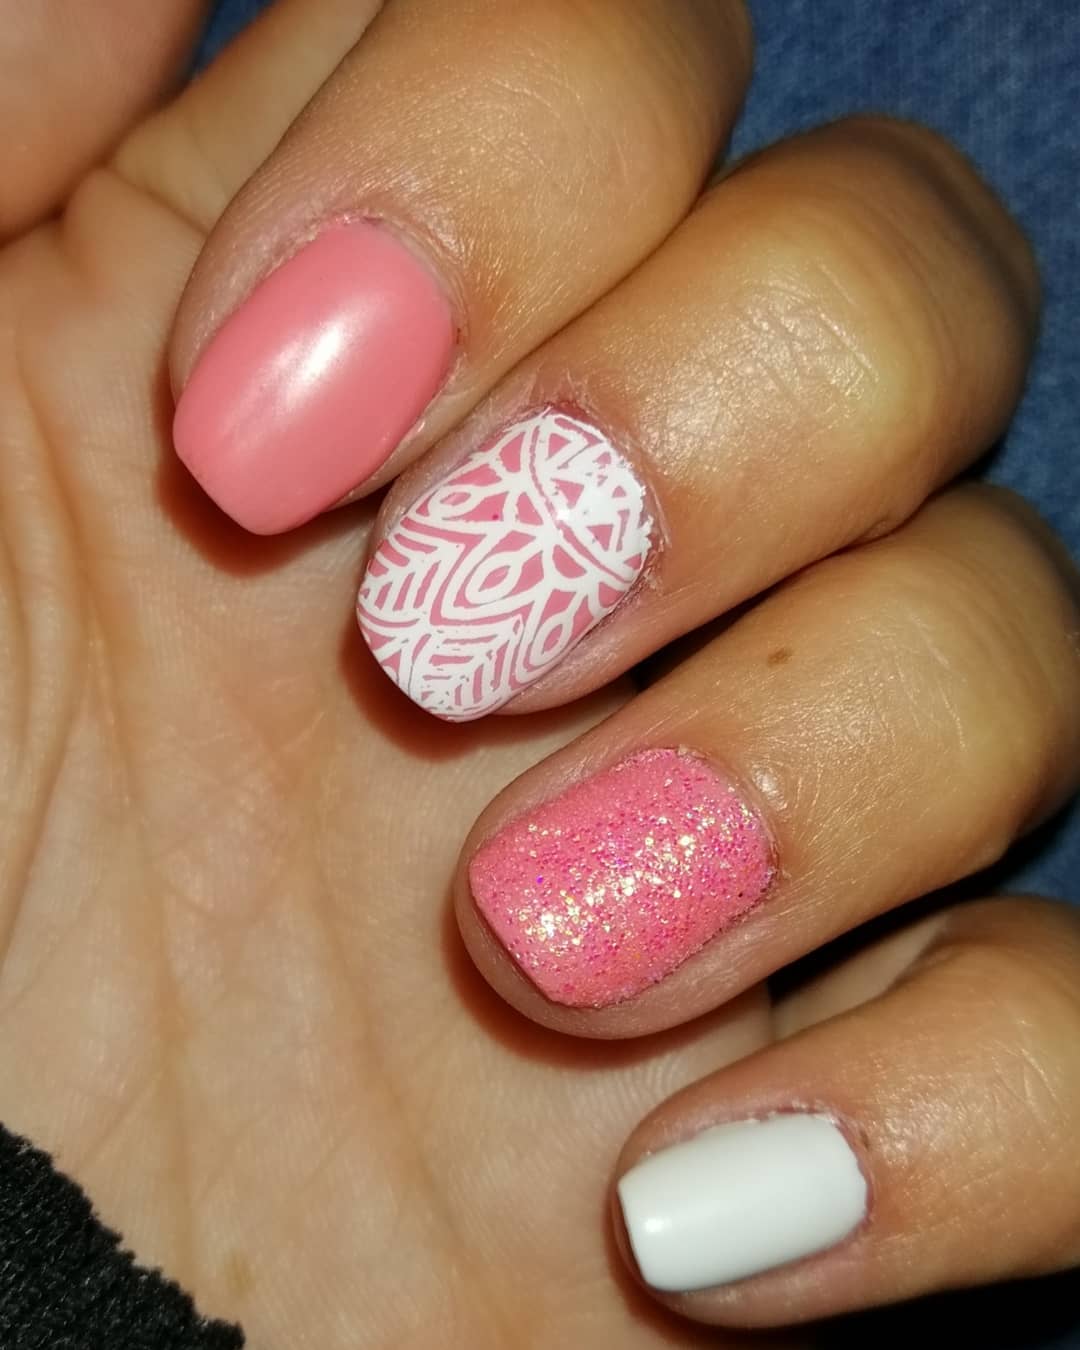 Shimmery Pink Nails with White Amazing Nail Art Design